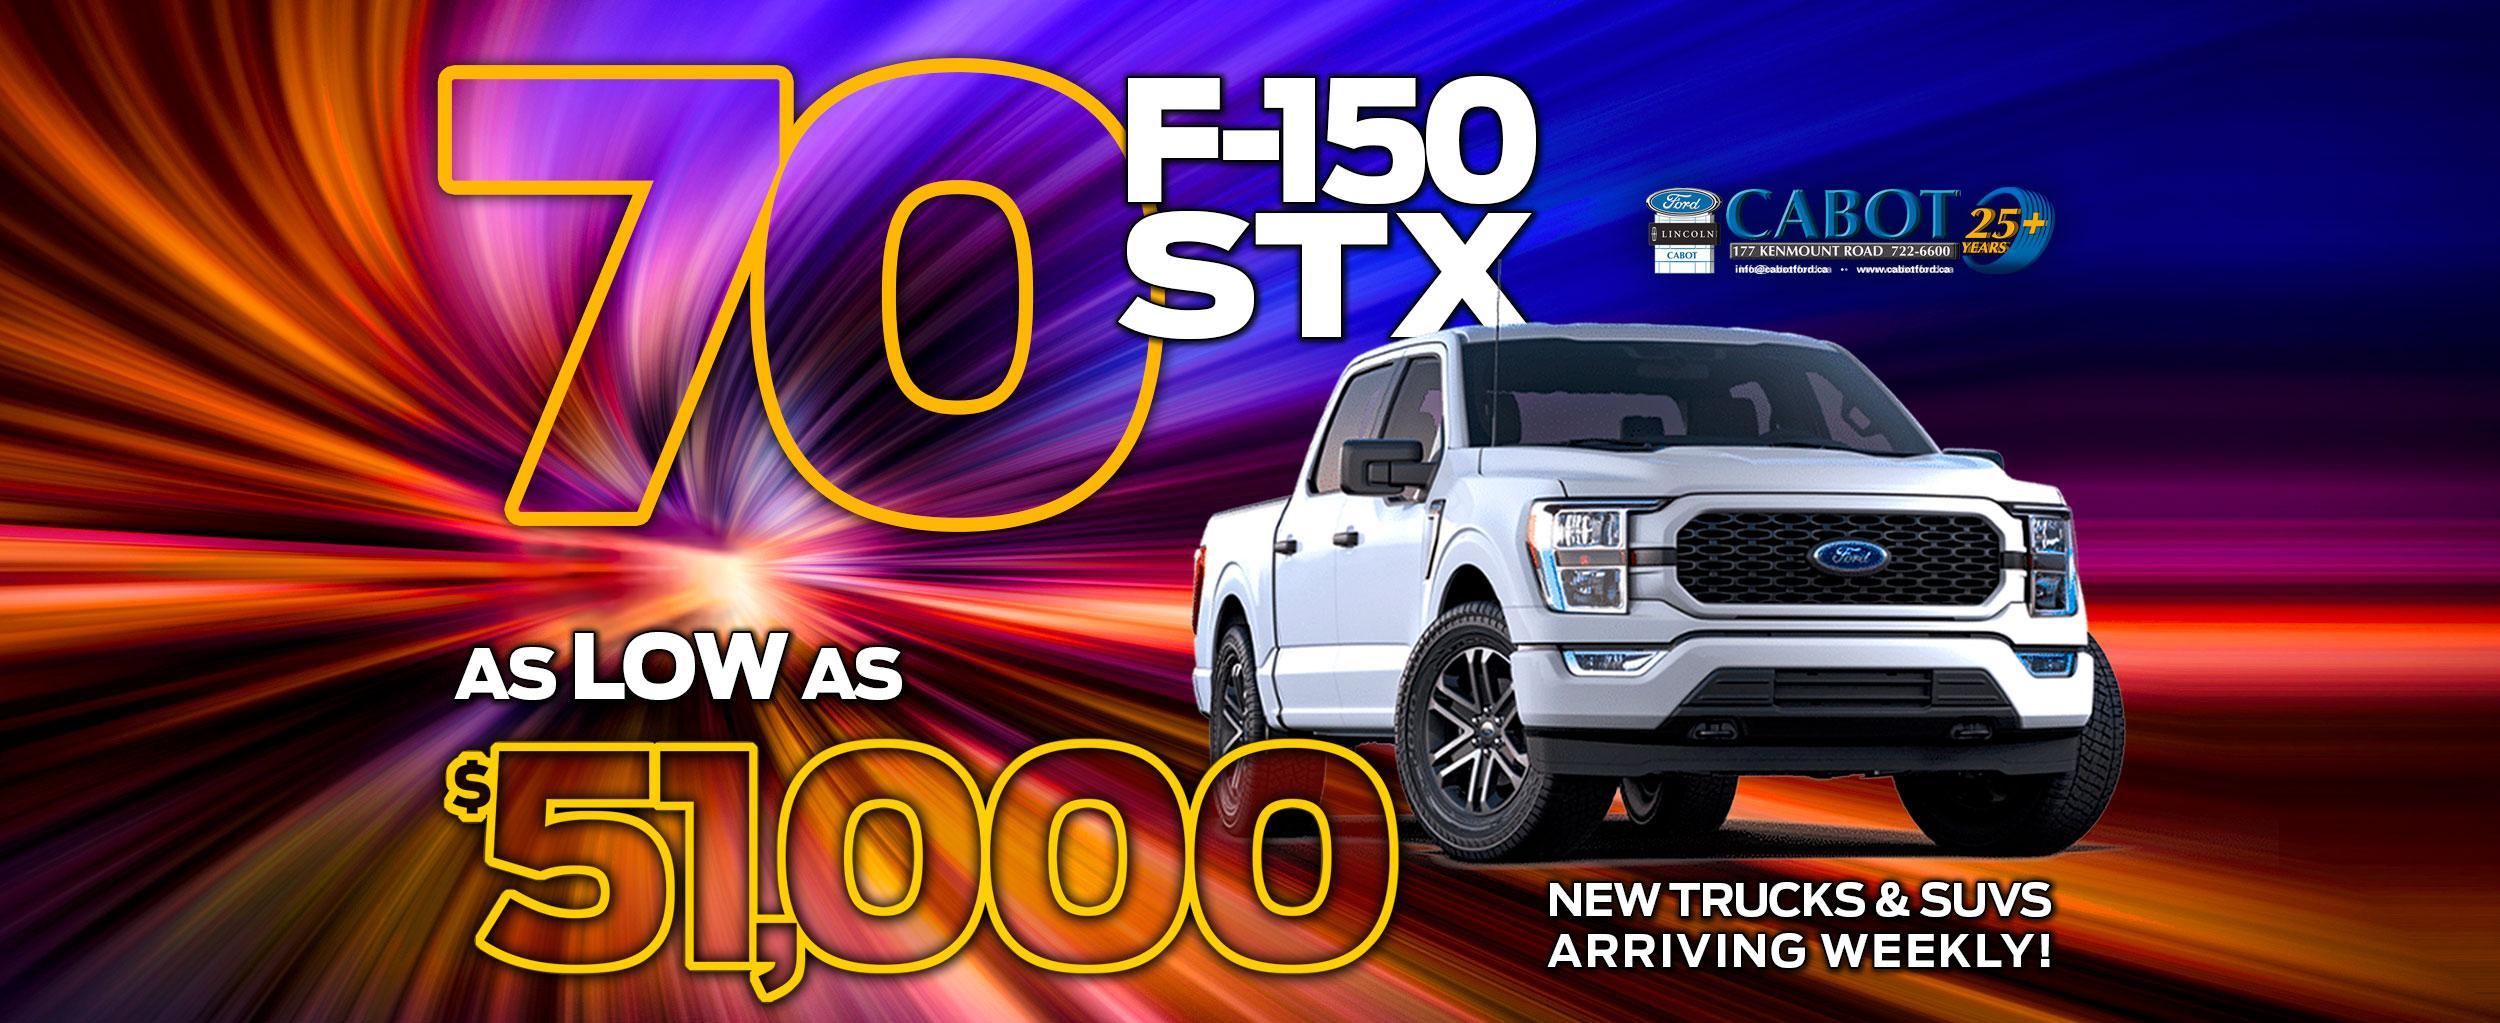 70 available F-150 STXs for as low as $51,000!